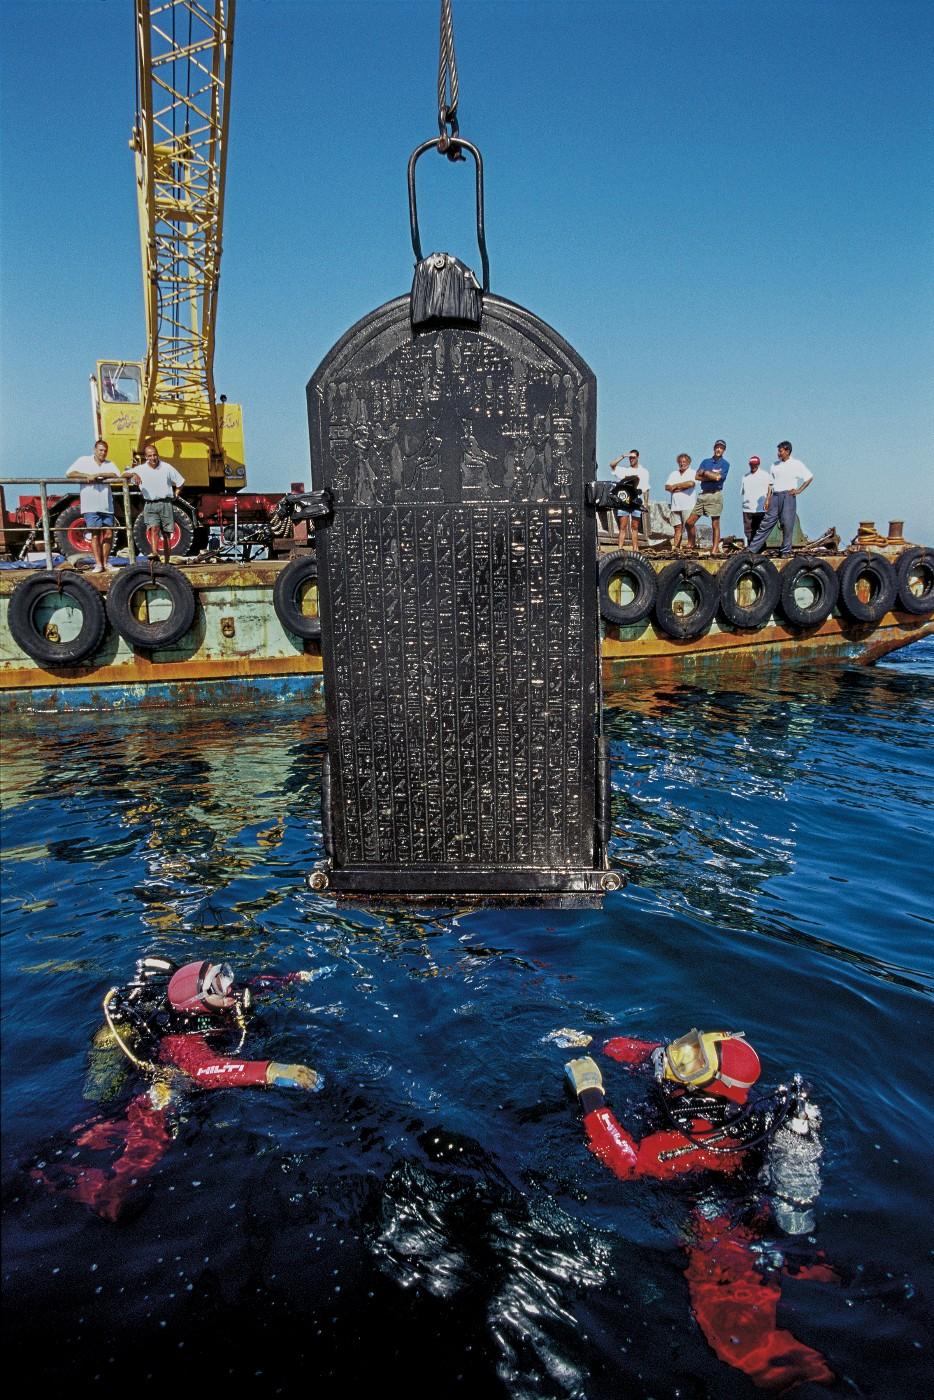 The stele of Thonis-Heracleion being raised out of the waters of the Bay Aboukir, Thonis-Heracleion, Aboukir Bay, Egypt